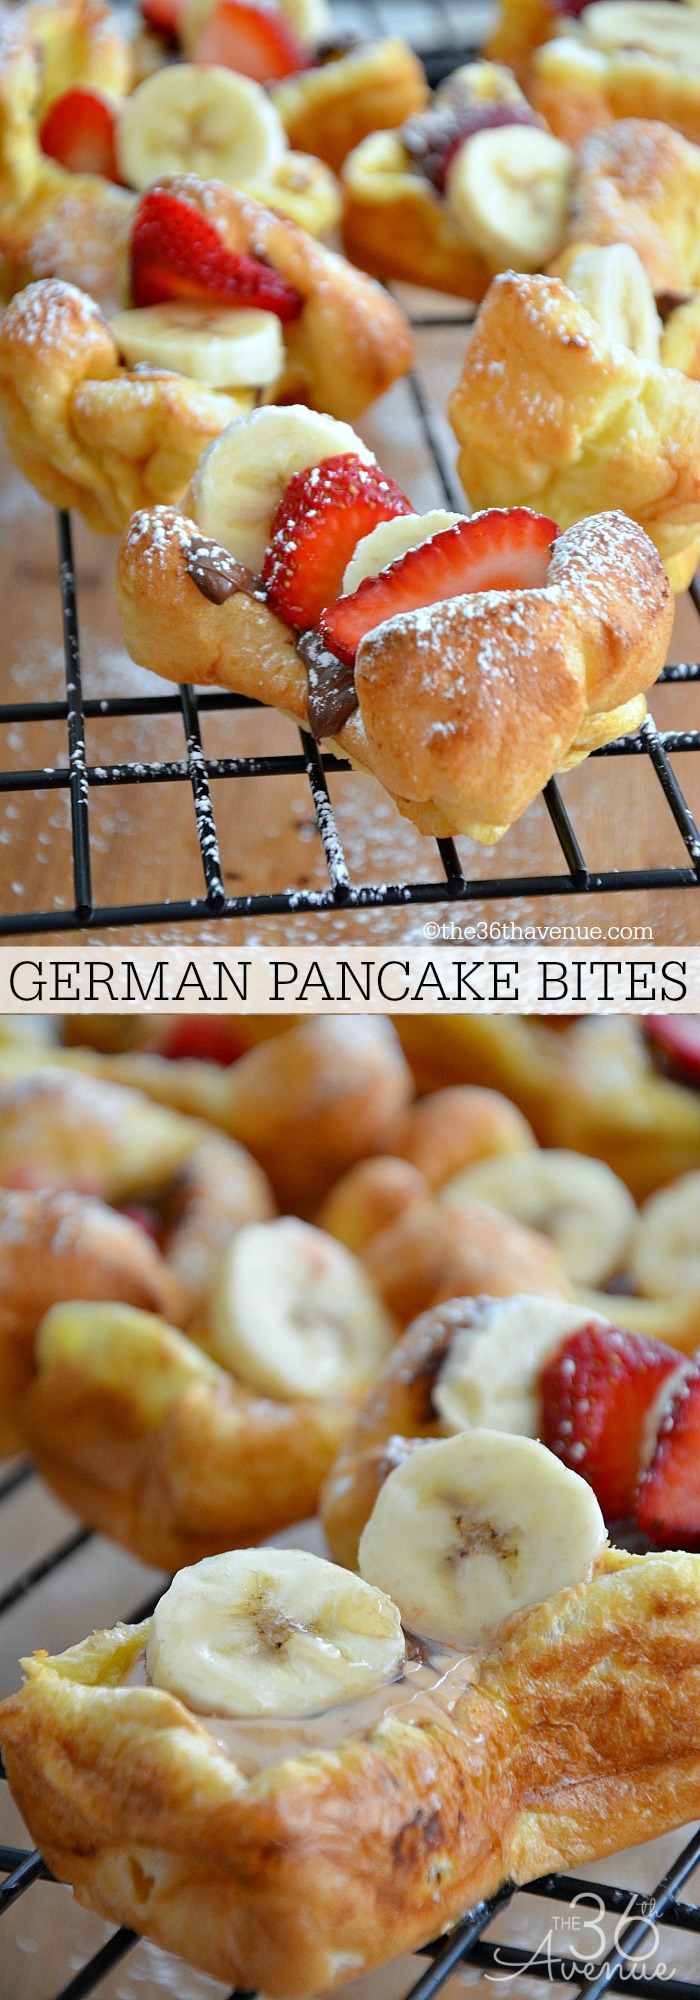 Recipes - German Pancake Bites at the36thavenue.com Pin it now and make them later!